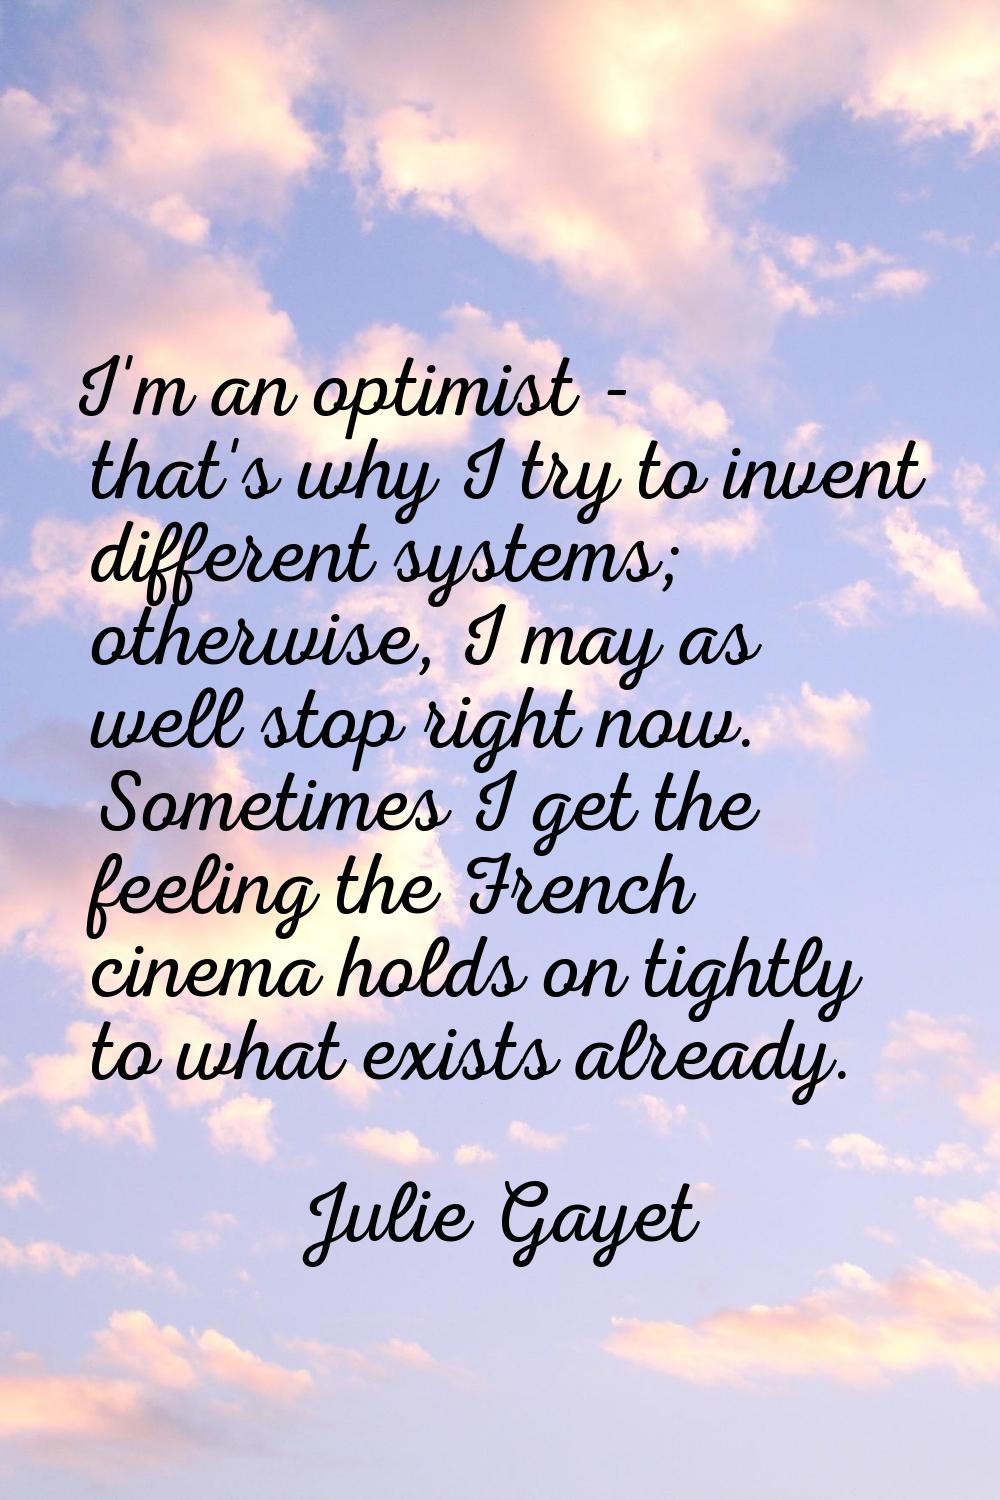 I'm an optimist - that's why I try to invent different systems; otherwise, I may as well stop right